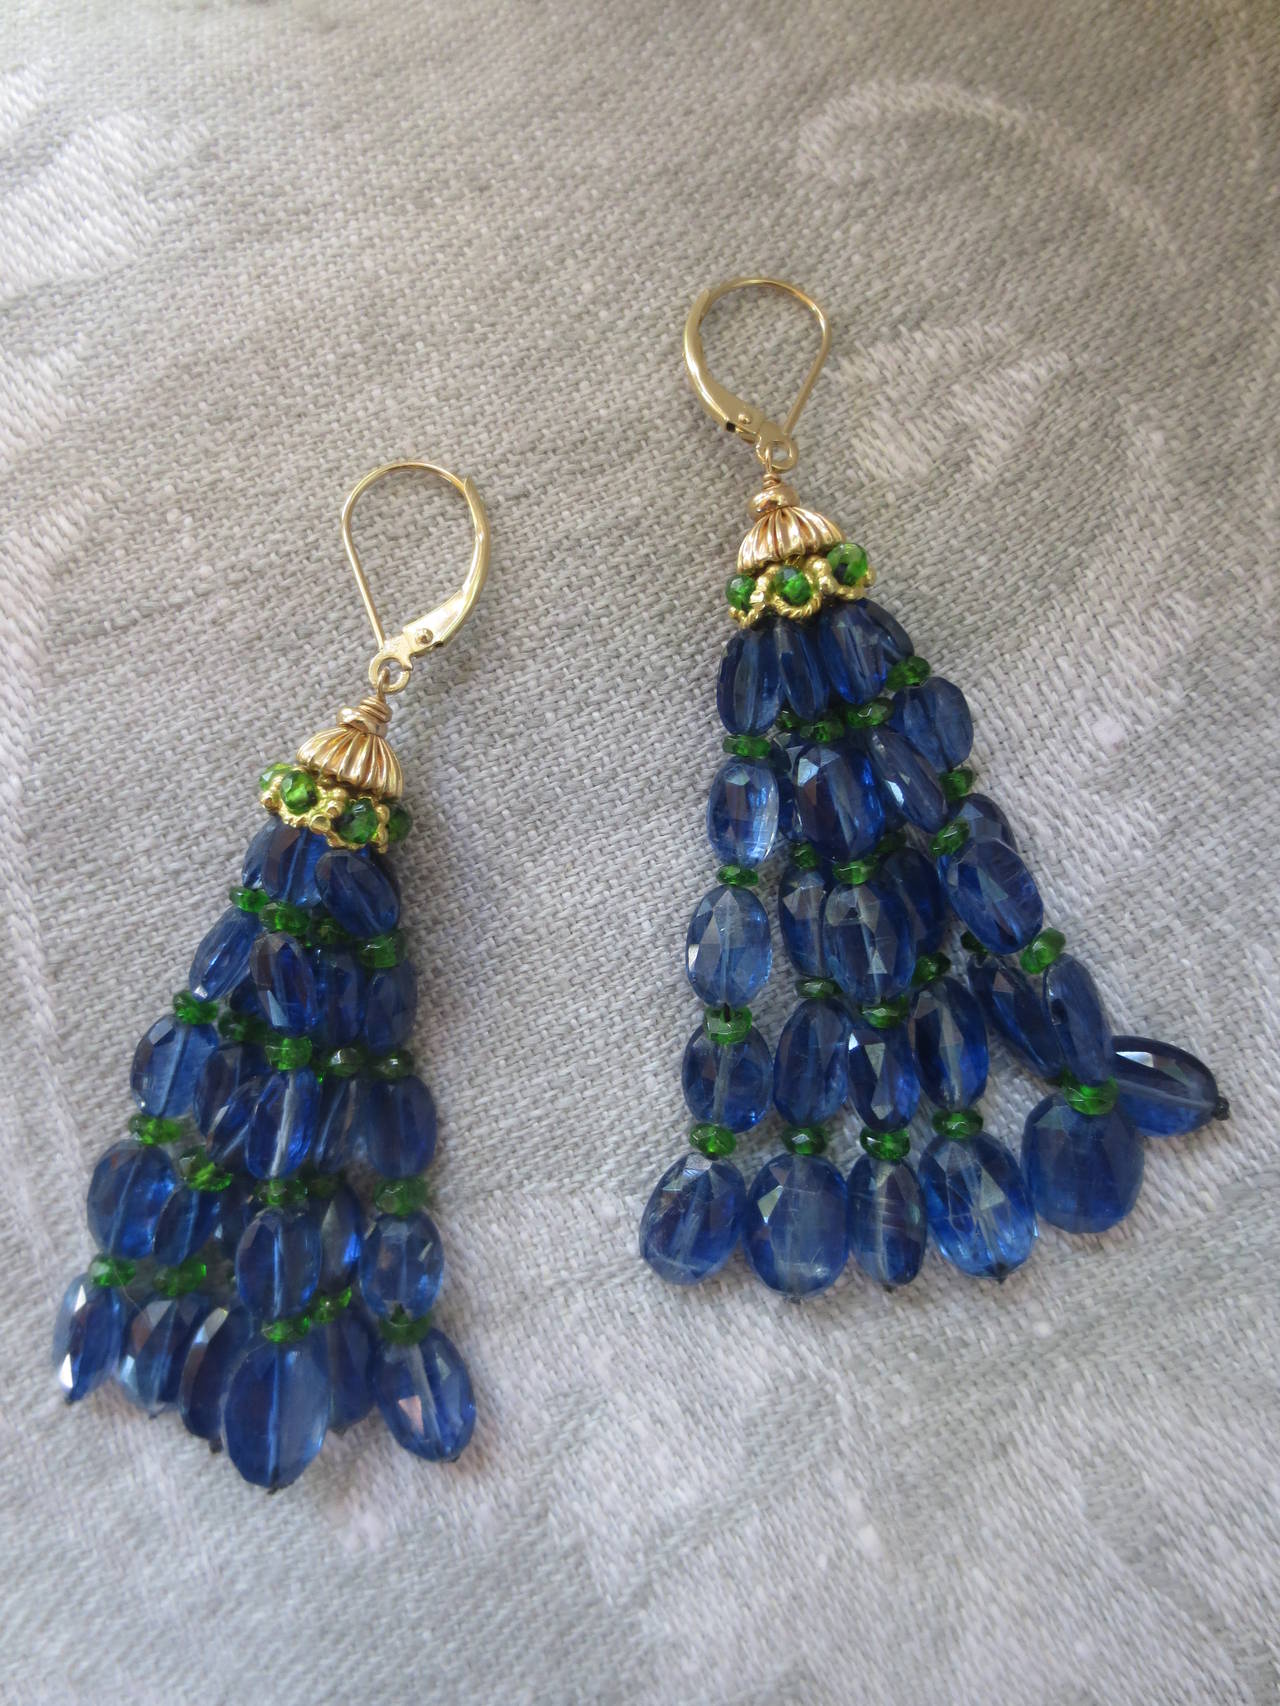 Oval cut deep blue kyanite and small vibrant green tsavorite beads elegantly drape in these tassel earrings. 14 karat gold cups adorn the top of these tassels, and are accented with tsavorite stones. These earrings are rich in color, and hang